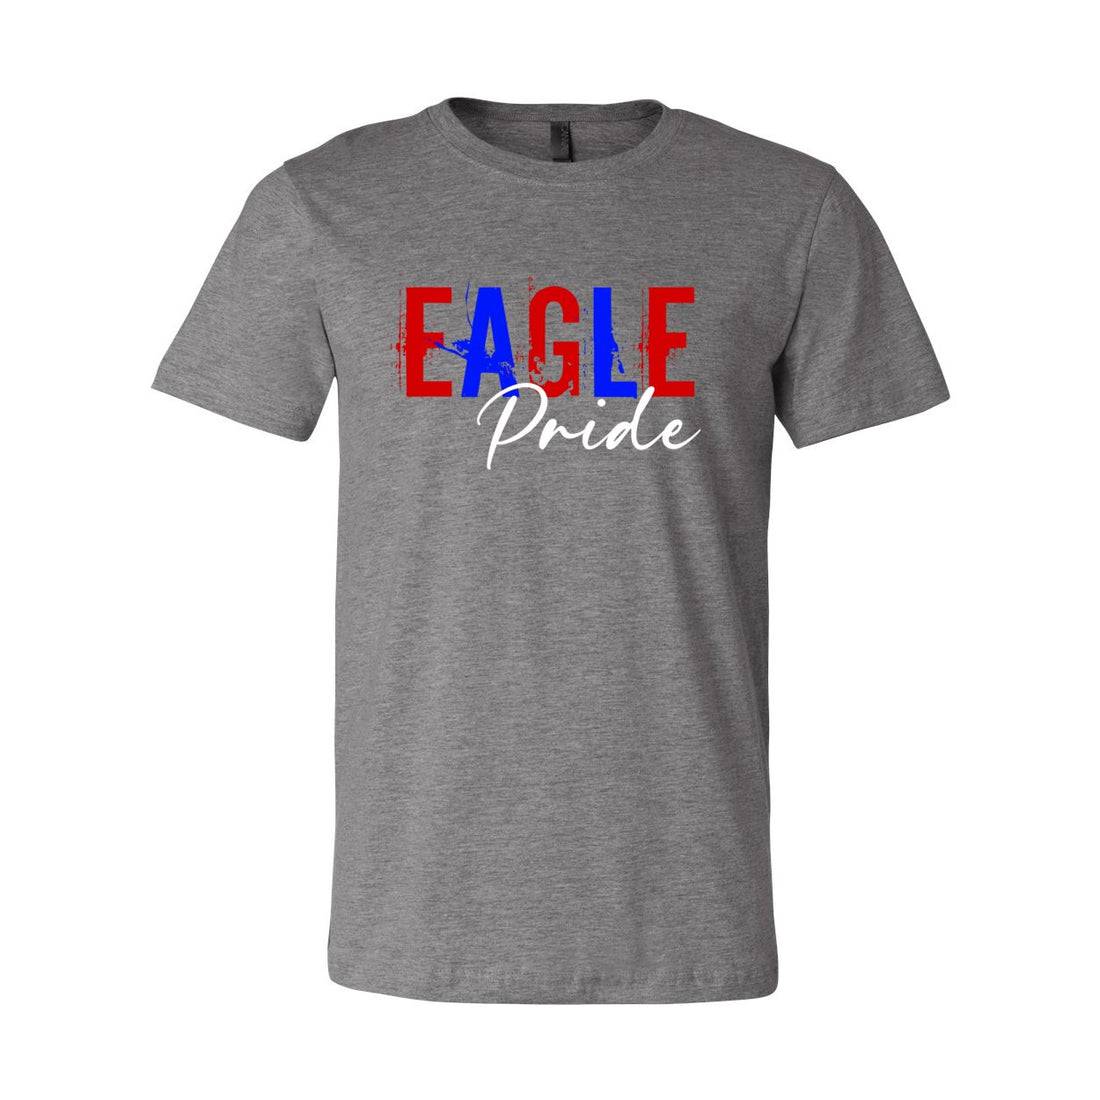 Eagle Pride Short Sleeve Jersey Tee - T-Shirts - Positively Sassy - Eagle Pride Short Sleeve Jersey Tee